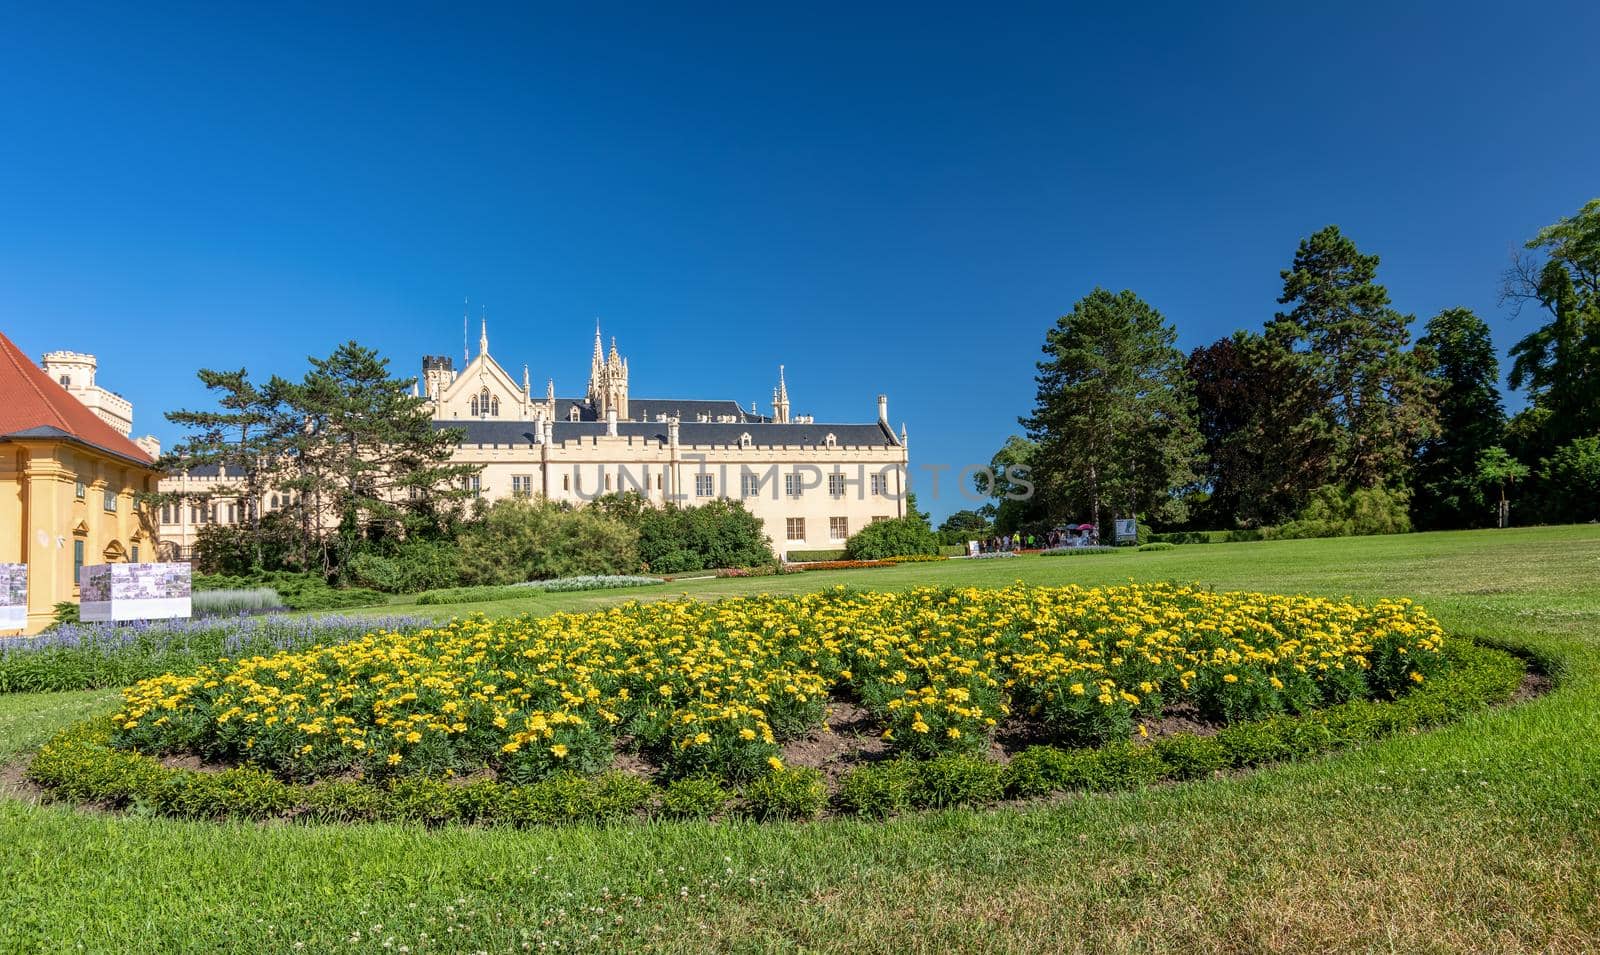 Lednice Chateau with beautiful gardens and parks on sunny summer day by artush